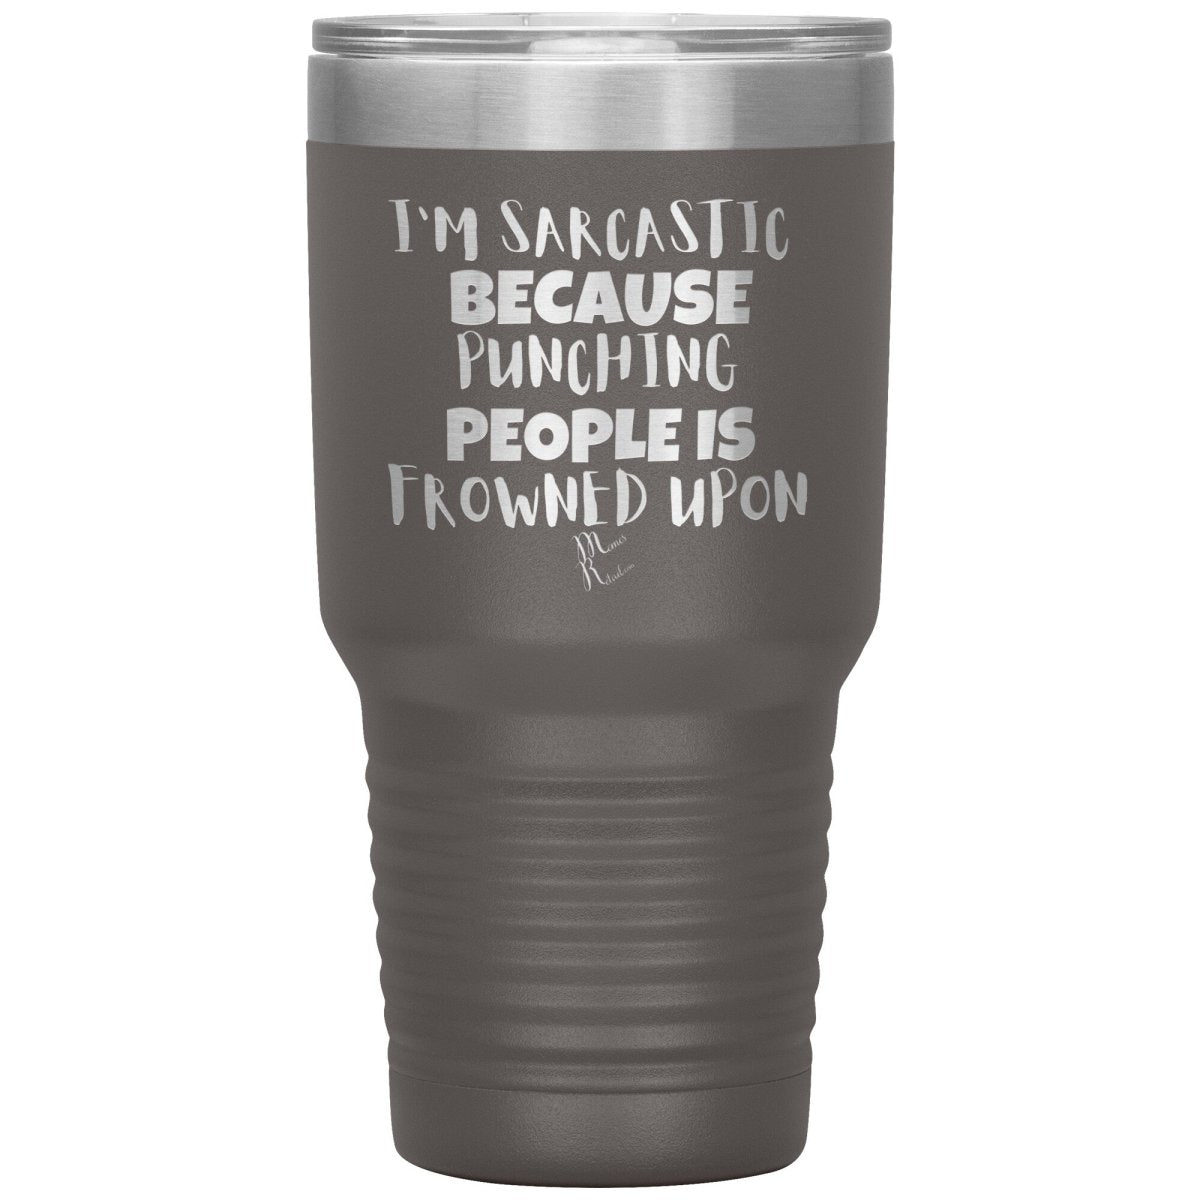 I'm Sarcastic Because Punching People is Frowned Upon Tumblers, 30oz Insulated Tumbler / Pewter - MemesRetail.com